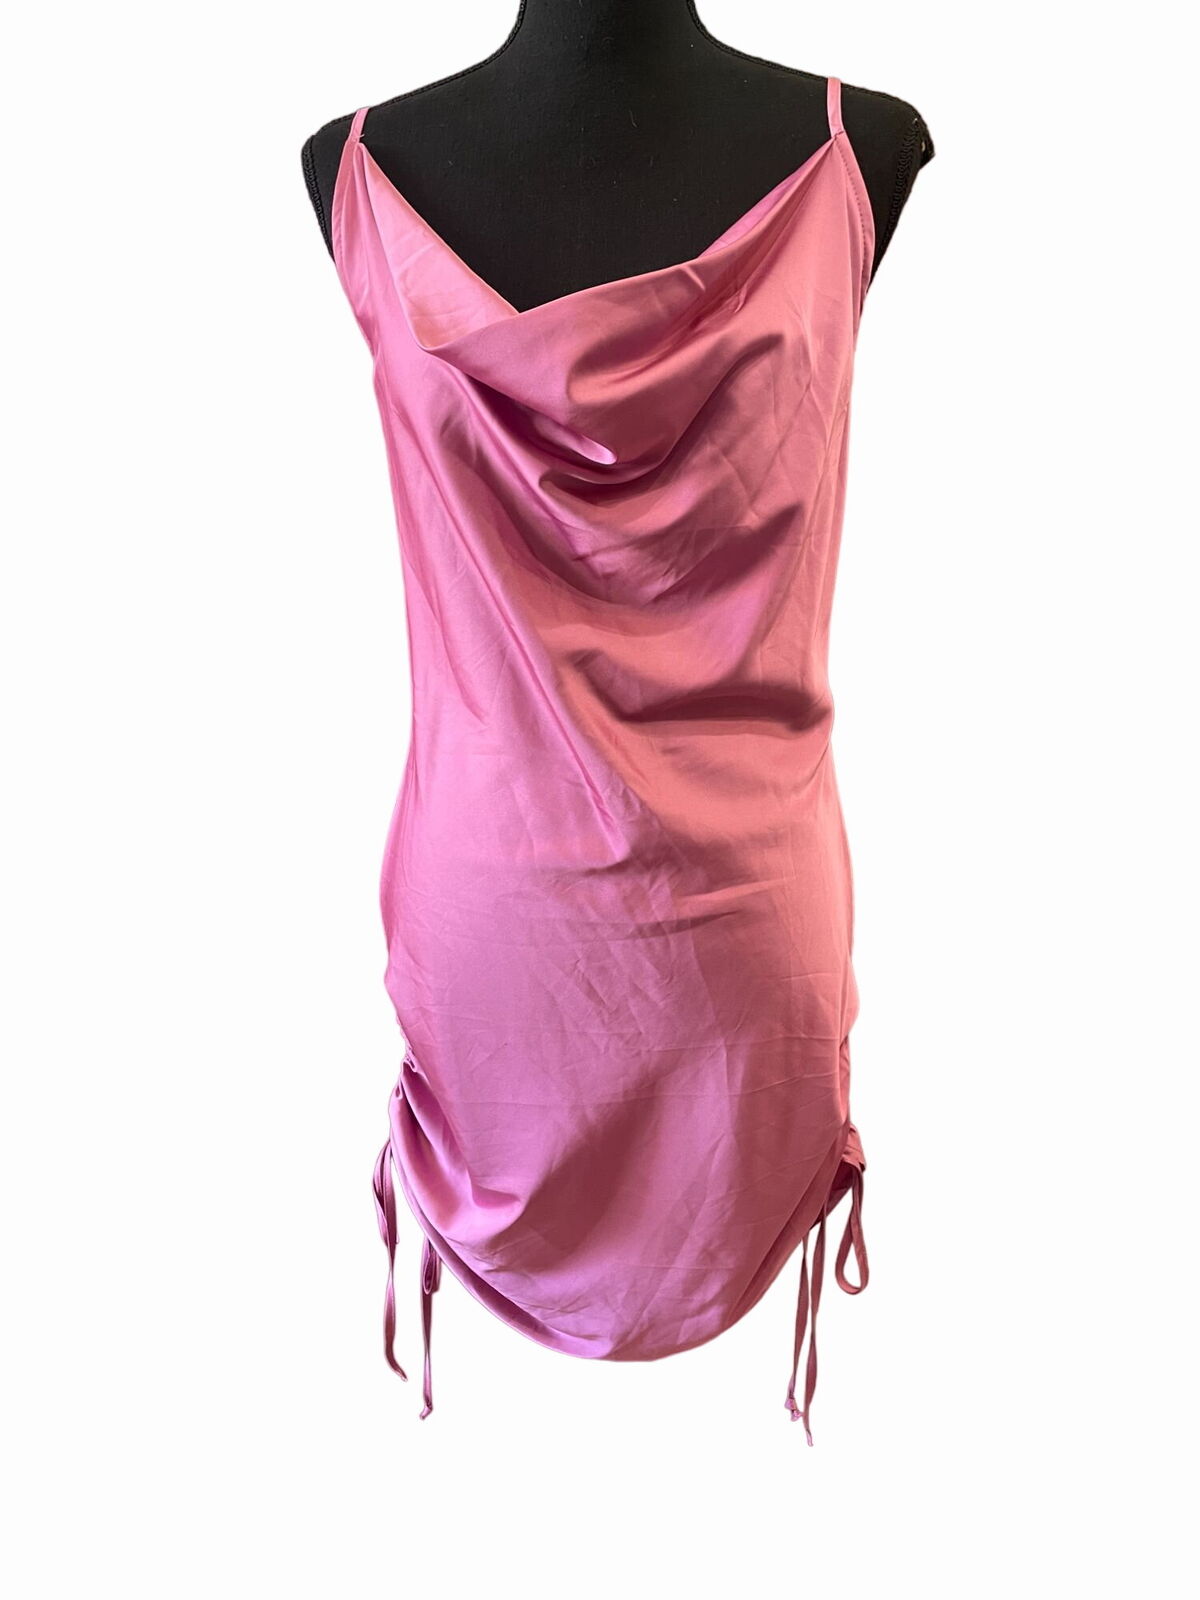 Kendall & Kylie nightclub dress Large slinky ruched rose silky cinched bodycon